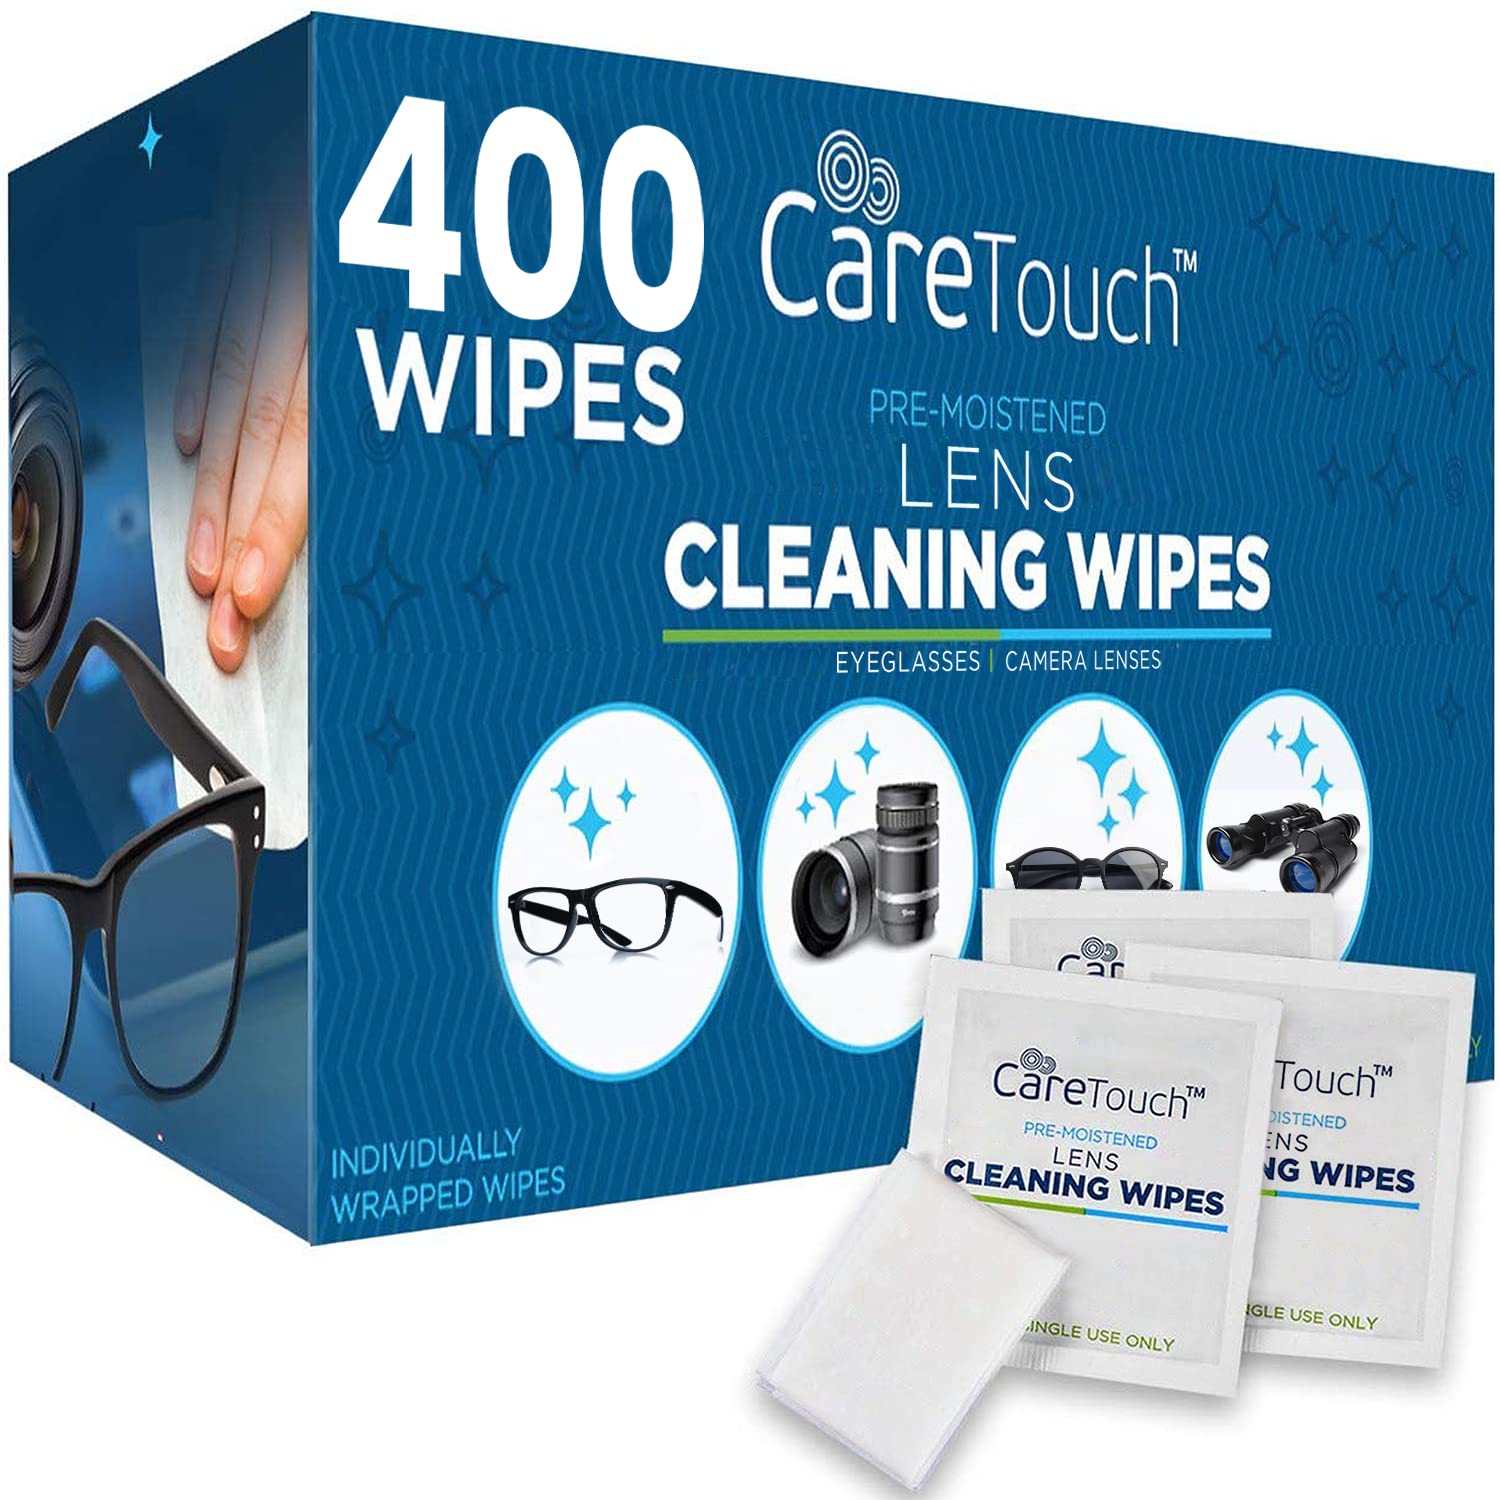 Care Touch Glasses Wipes, 400ct - Lens Cleaning Wipes for Eyeglasses, Eyeglass Wipes Individually Wrapped, Eyeglass Cleaner Lens Wipes, Lenses Wipes for Cleaning Glasses&Optical Lens, Disposable Wipes